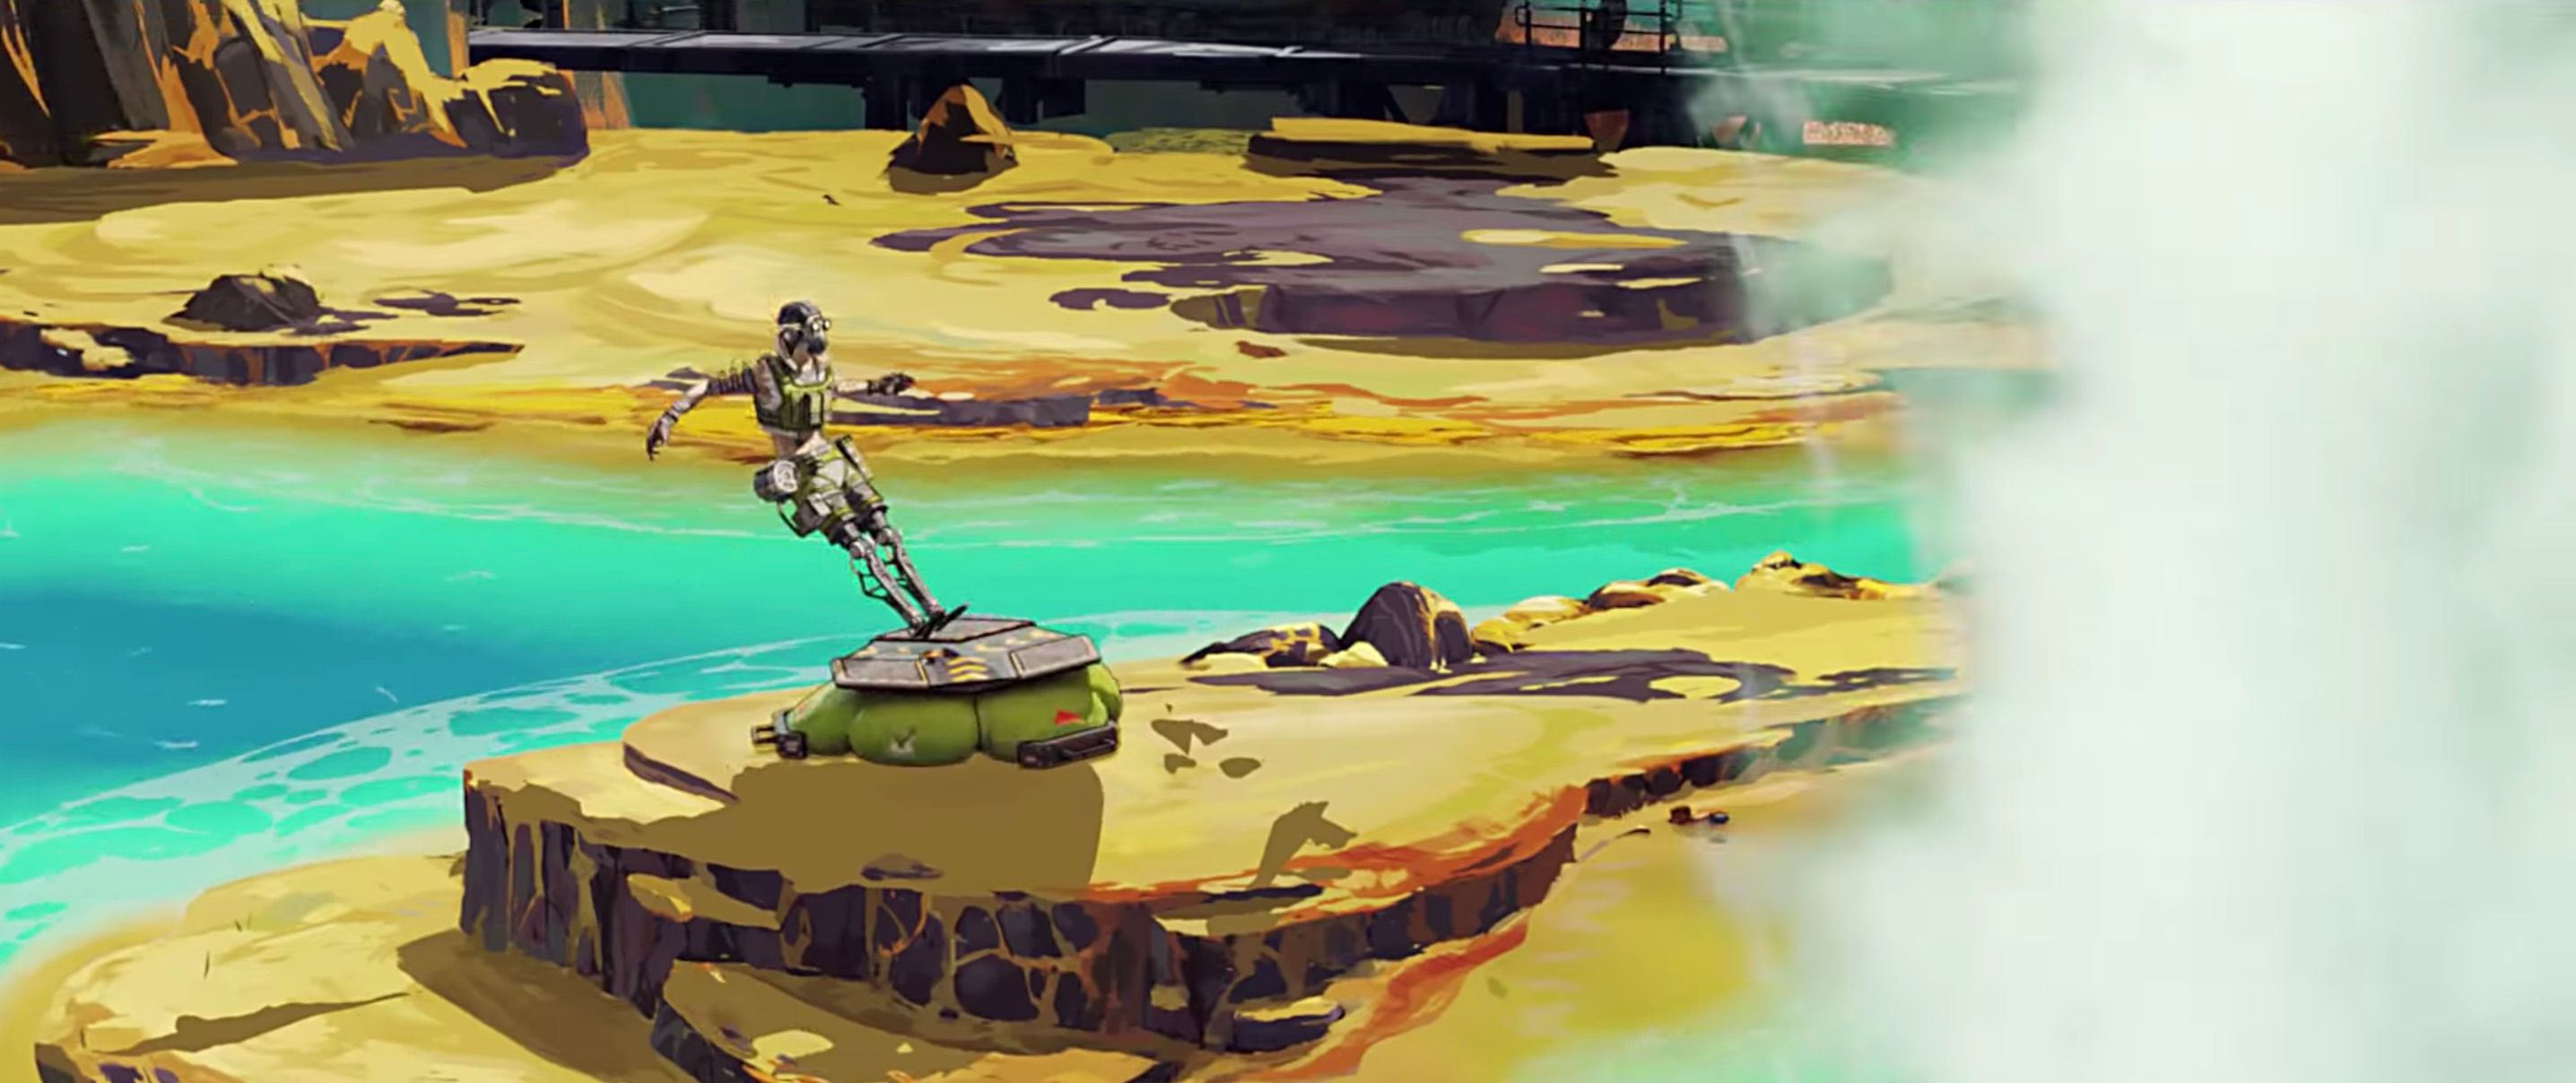 Apex Legends Season 3 Trailer Everything We Learned About The New Map